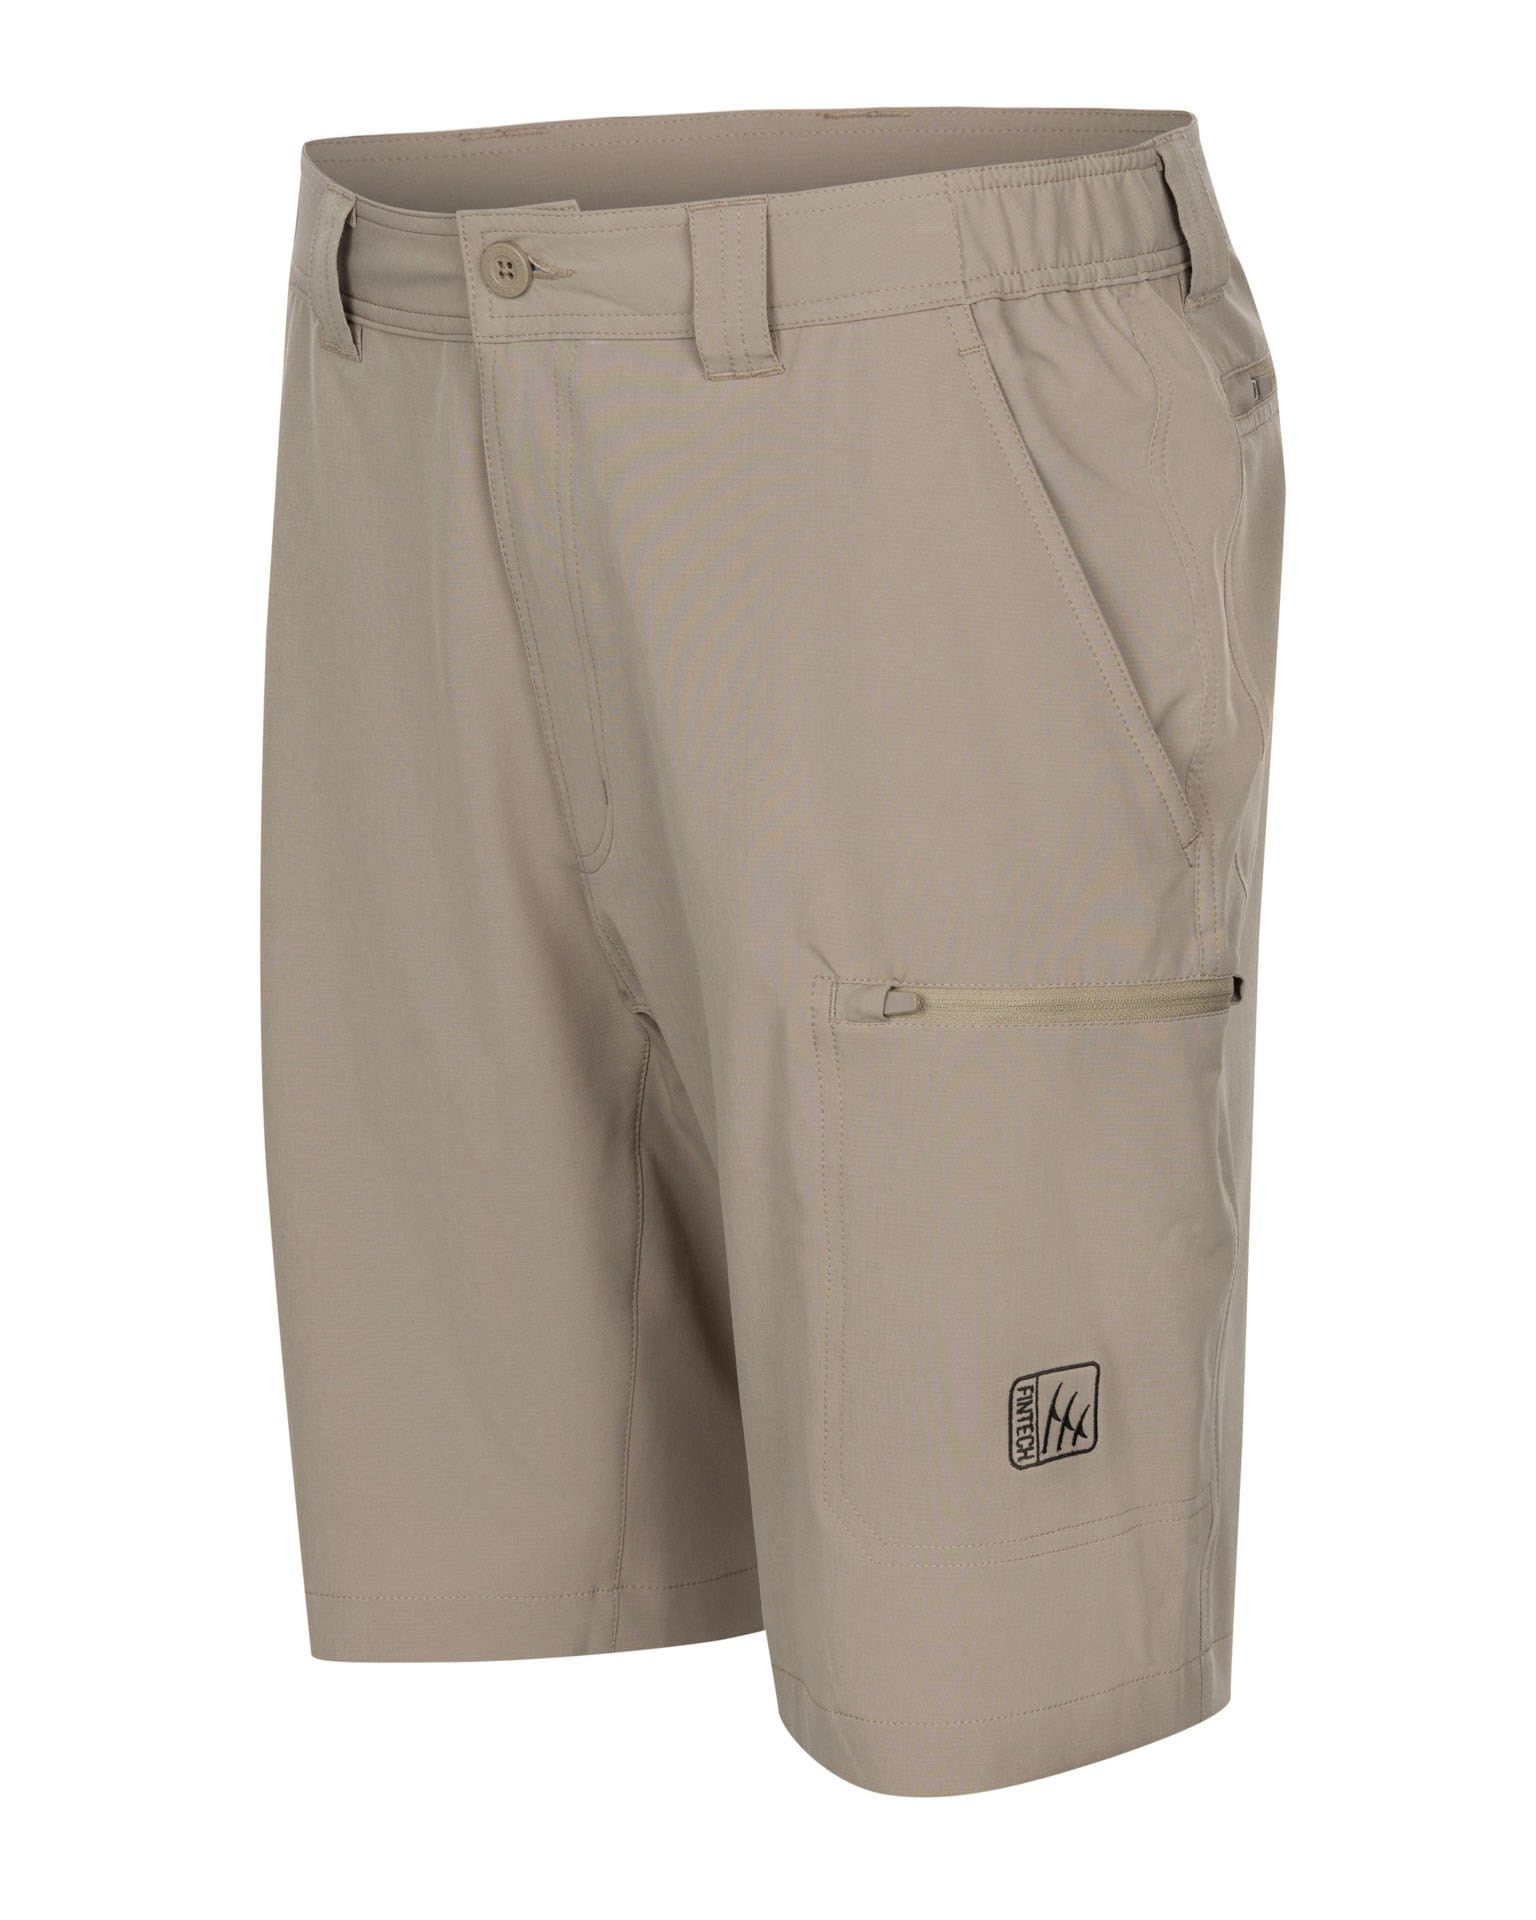 Shorts For Men: How Short Is Too Short? - Lowes Menswear